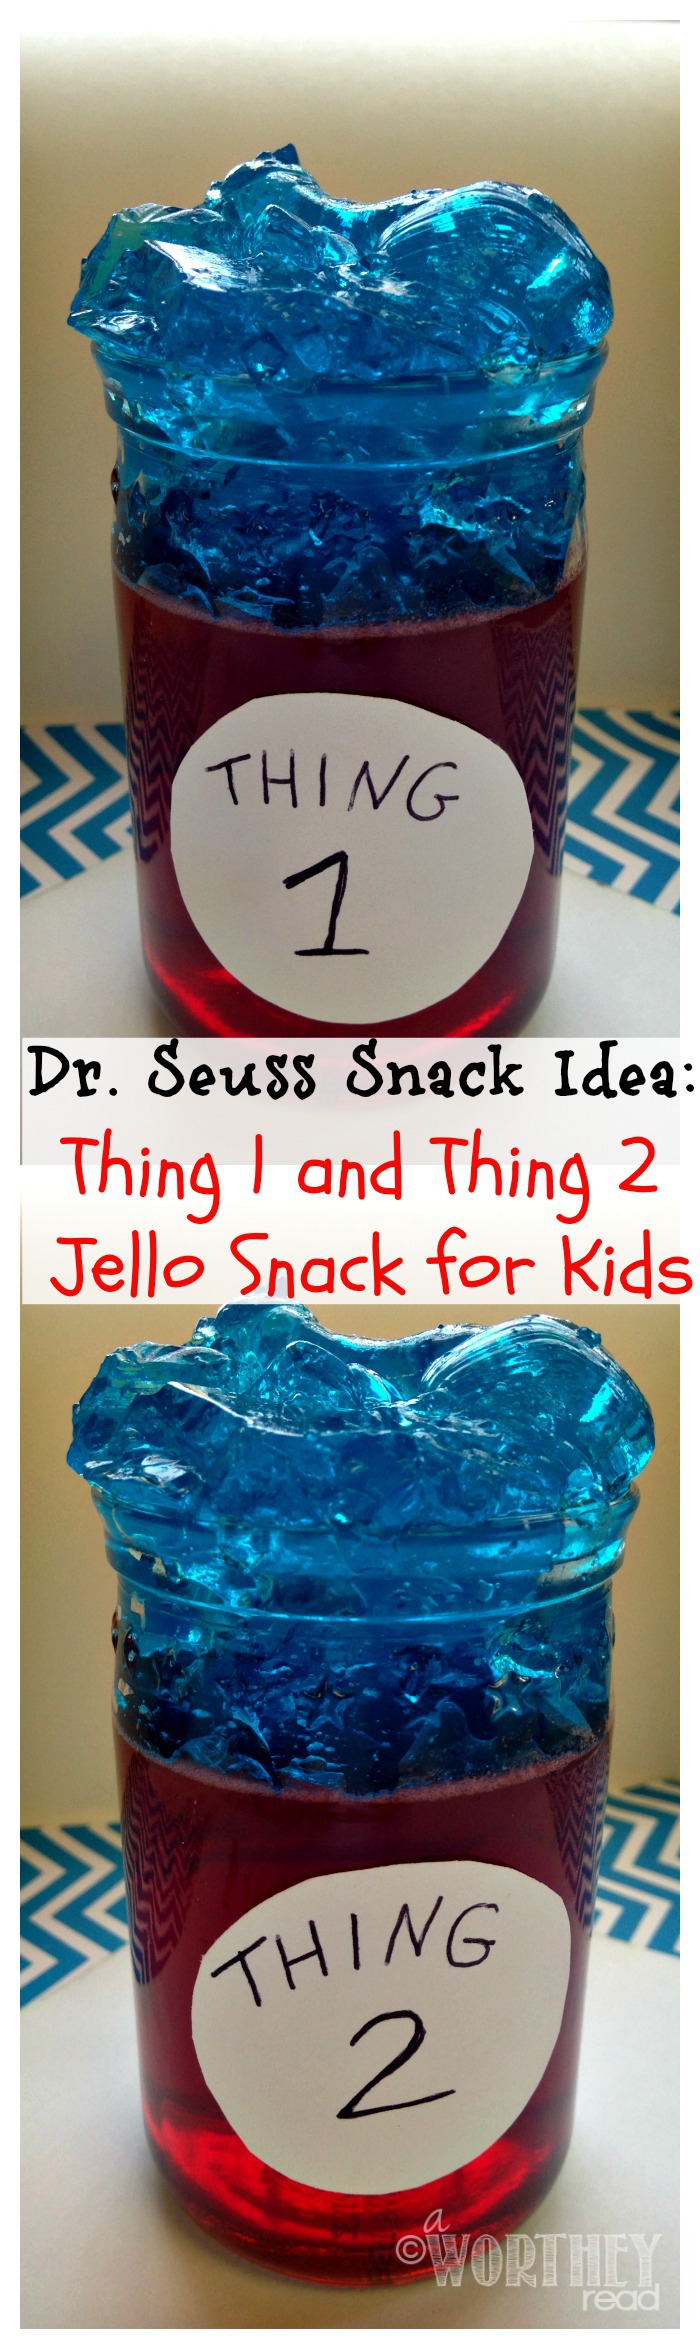 Dr. Seuss Snack Idea Thing 1 and Thing 2 Jello Snack for Kids